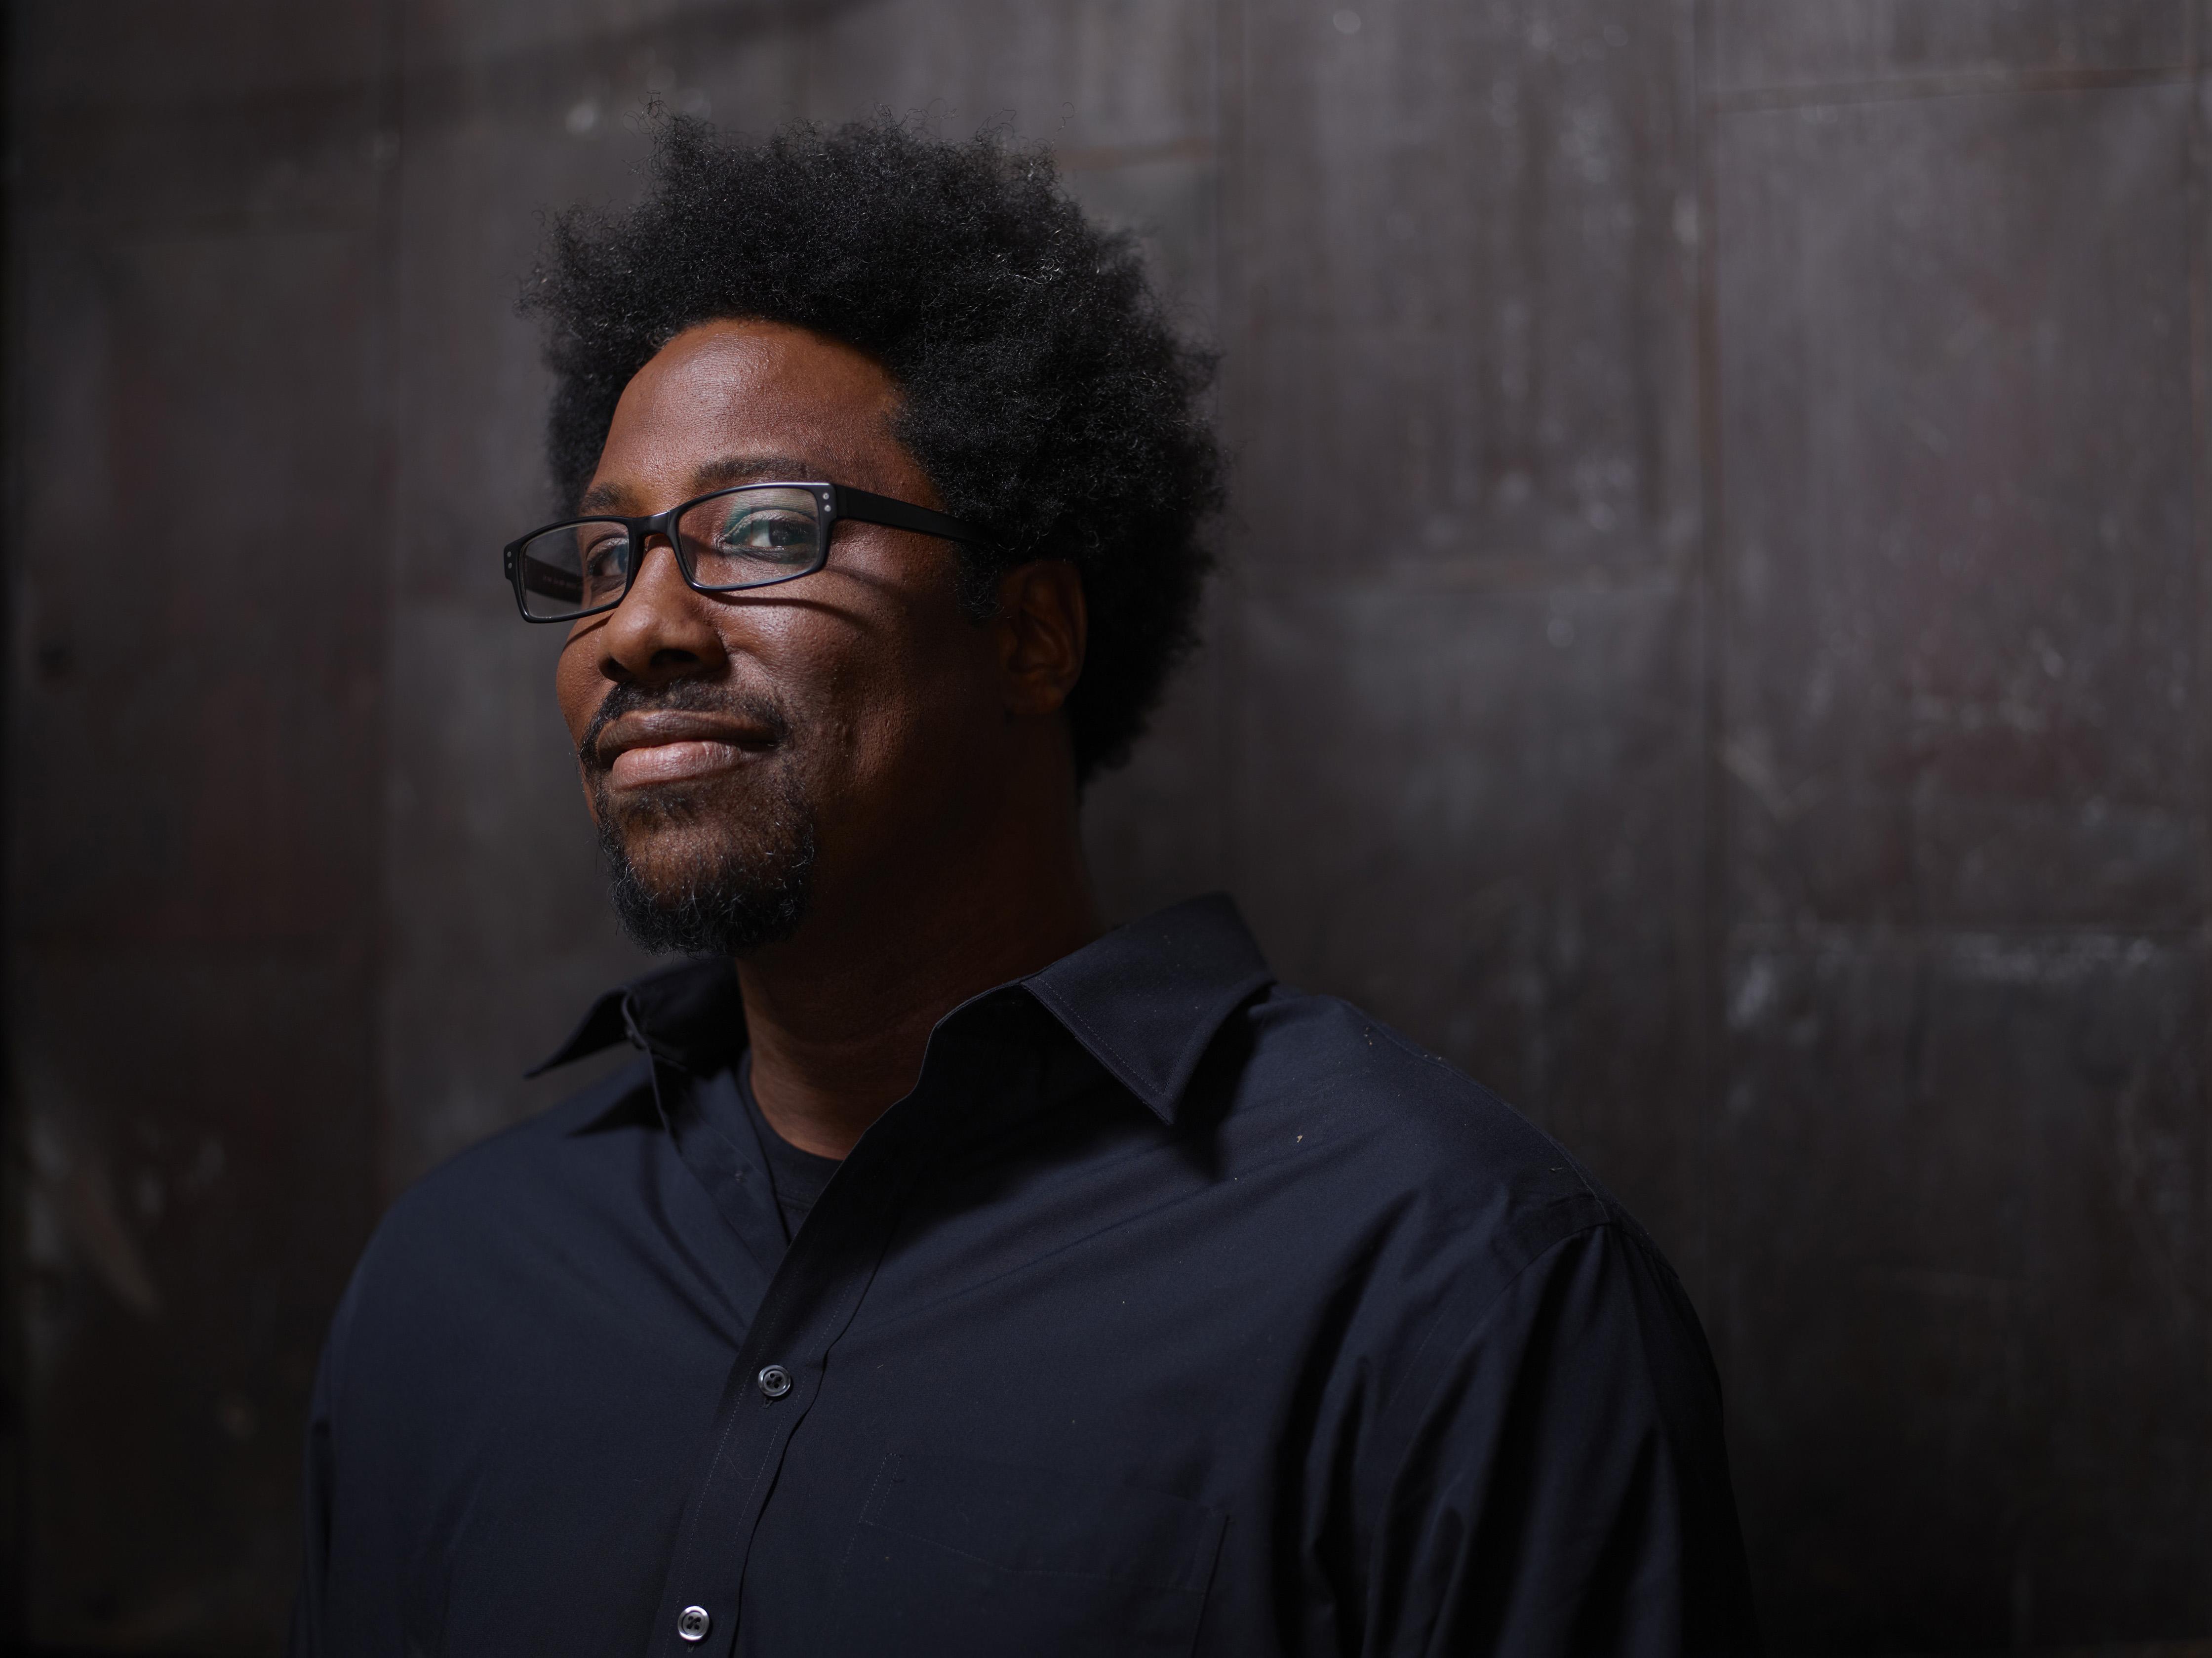 Portrait of man with glasses and an afro